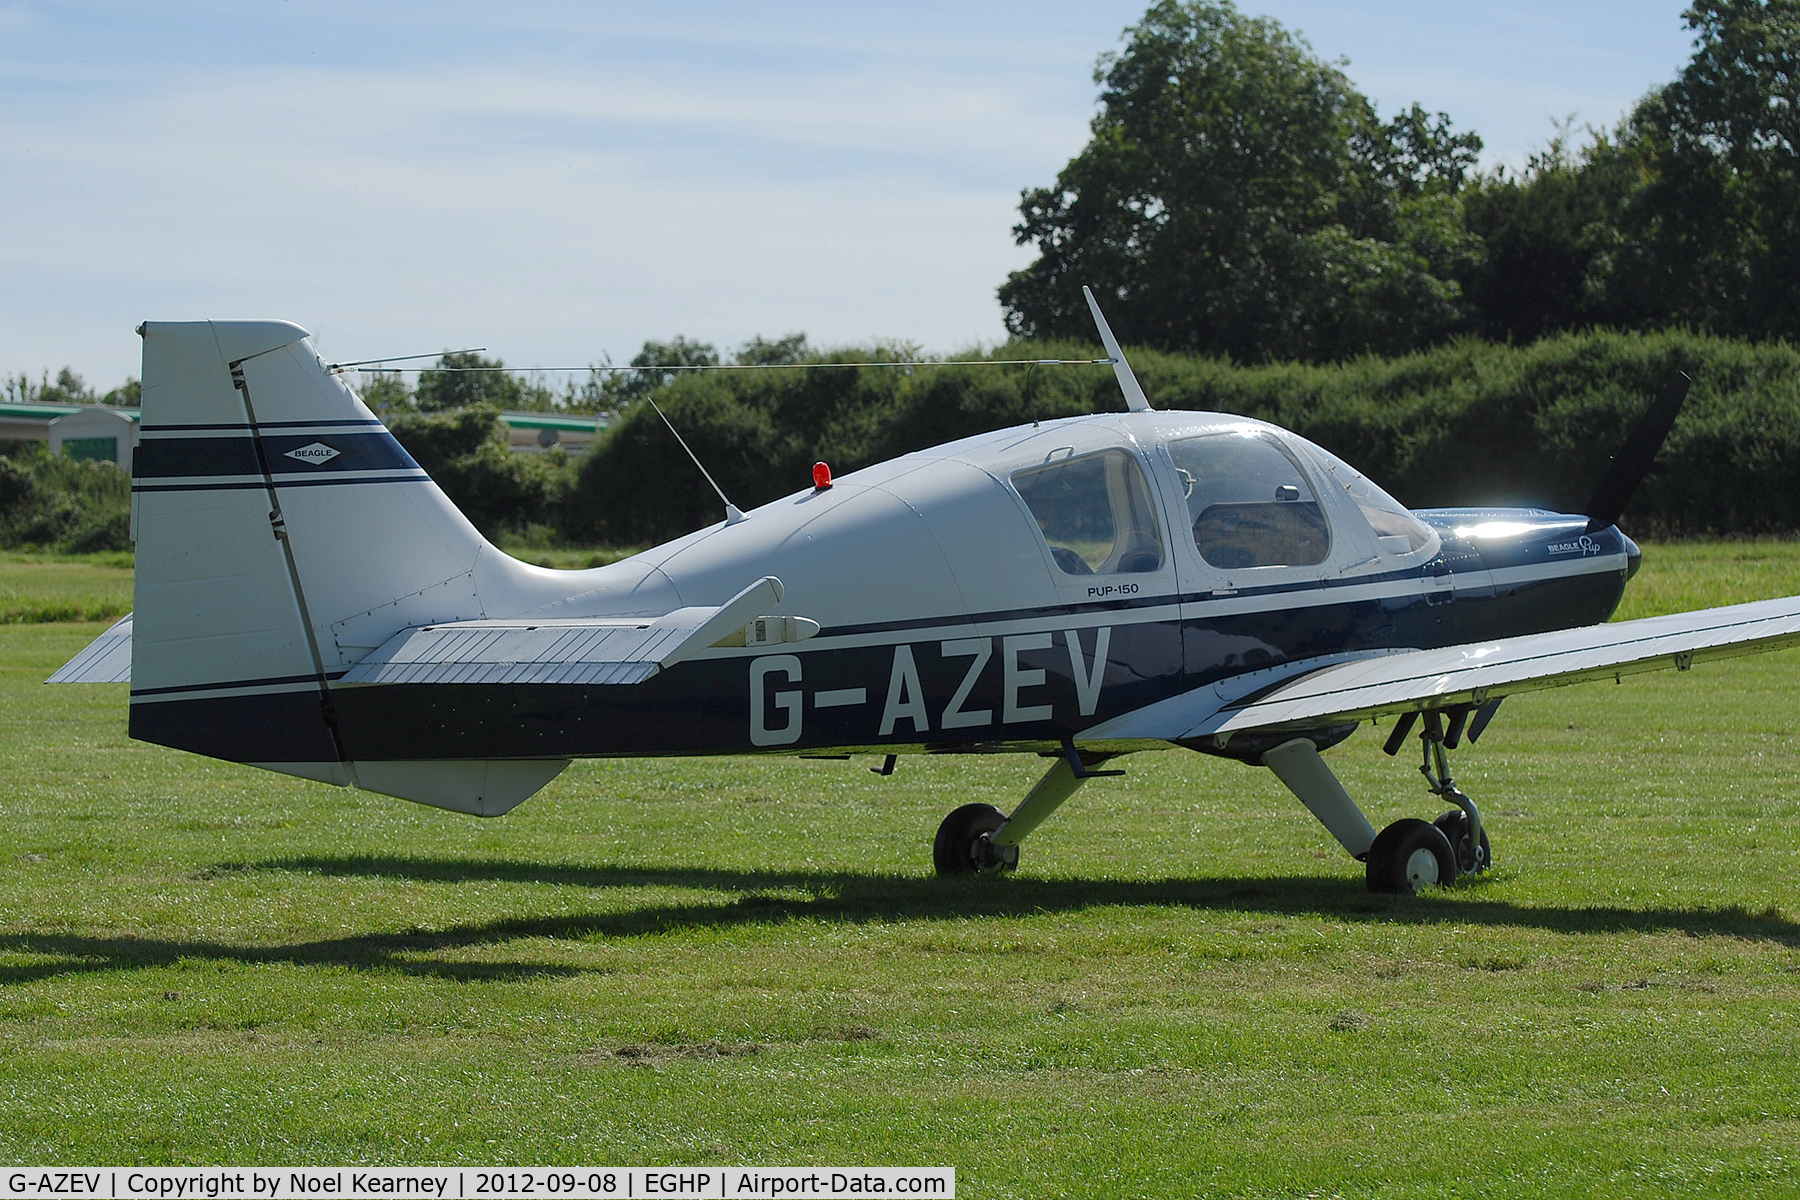 G-AZEV, 1969 Beagle B-121 Pup Series 2 (Pup 150) C/N B121-131, At the Vintage Fly-in at Popham Sept '12